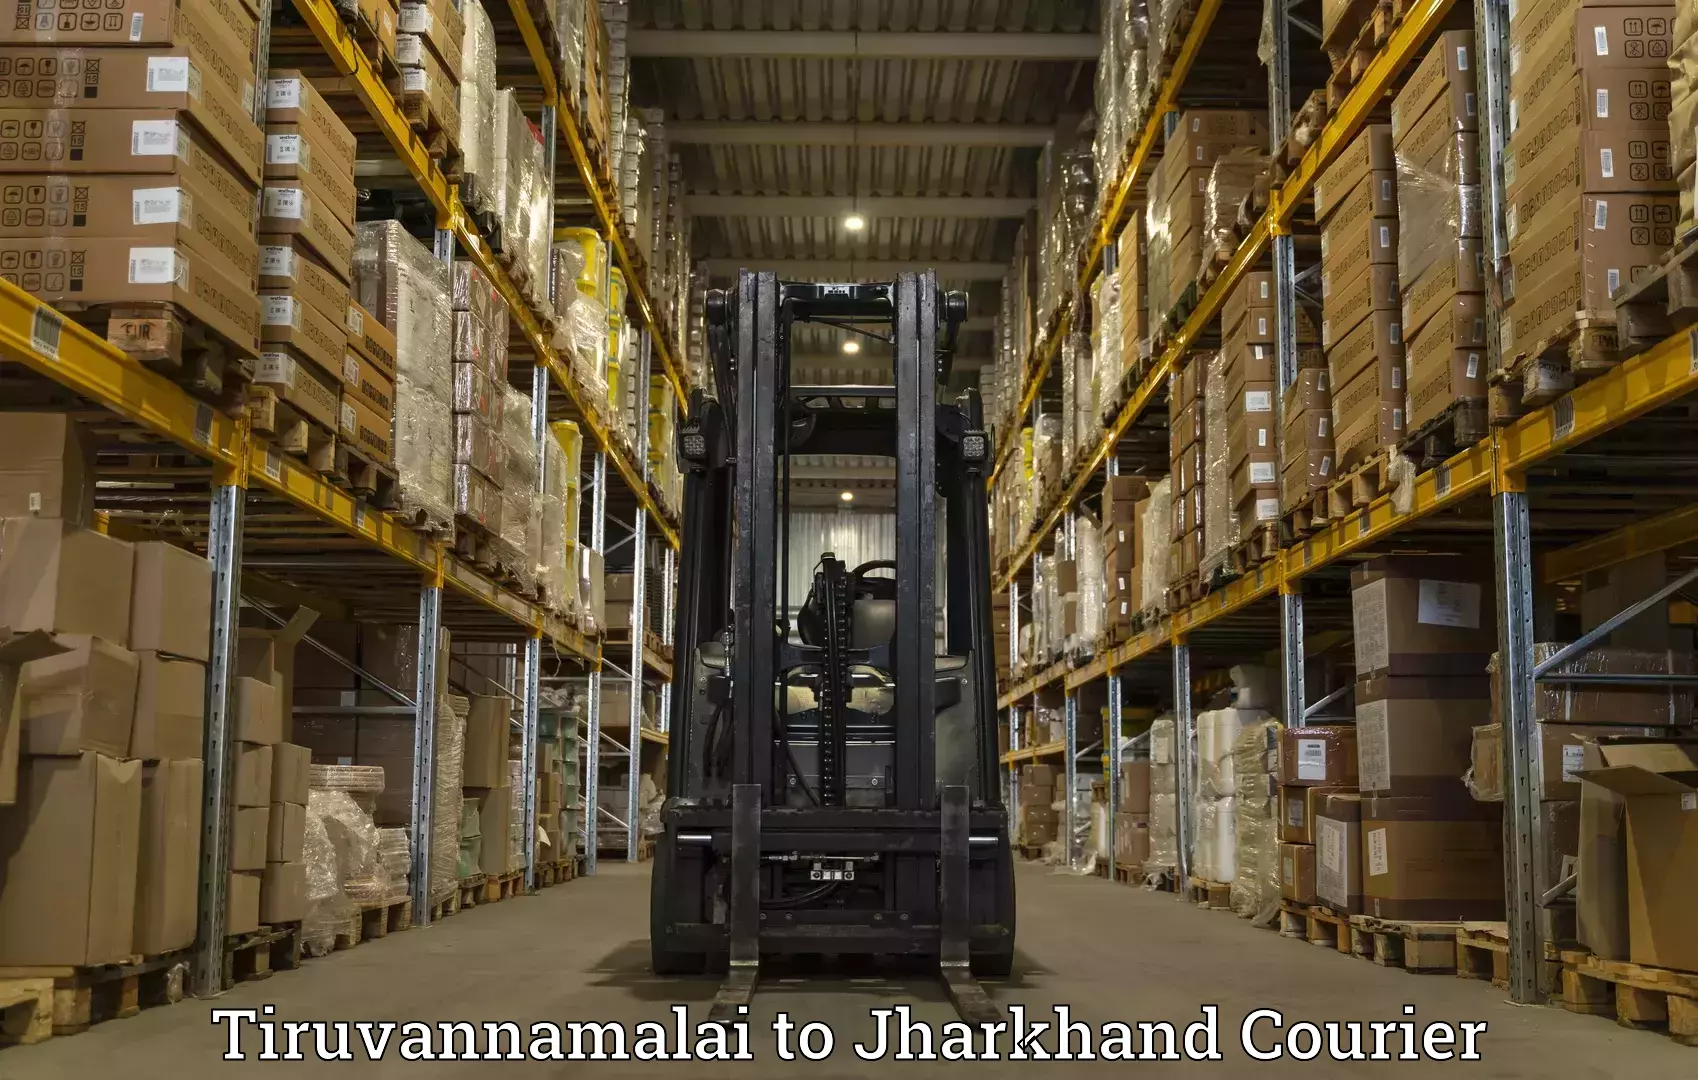 Express delivery network Tiruvannamalai to Jharia